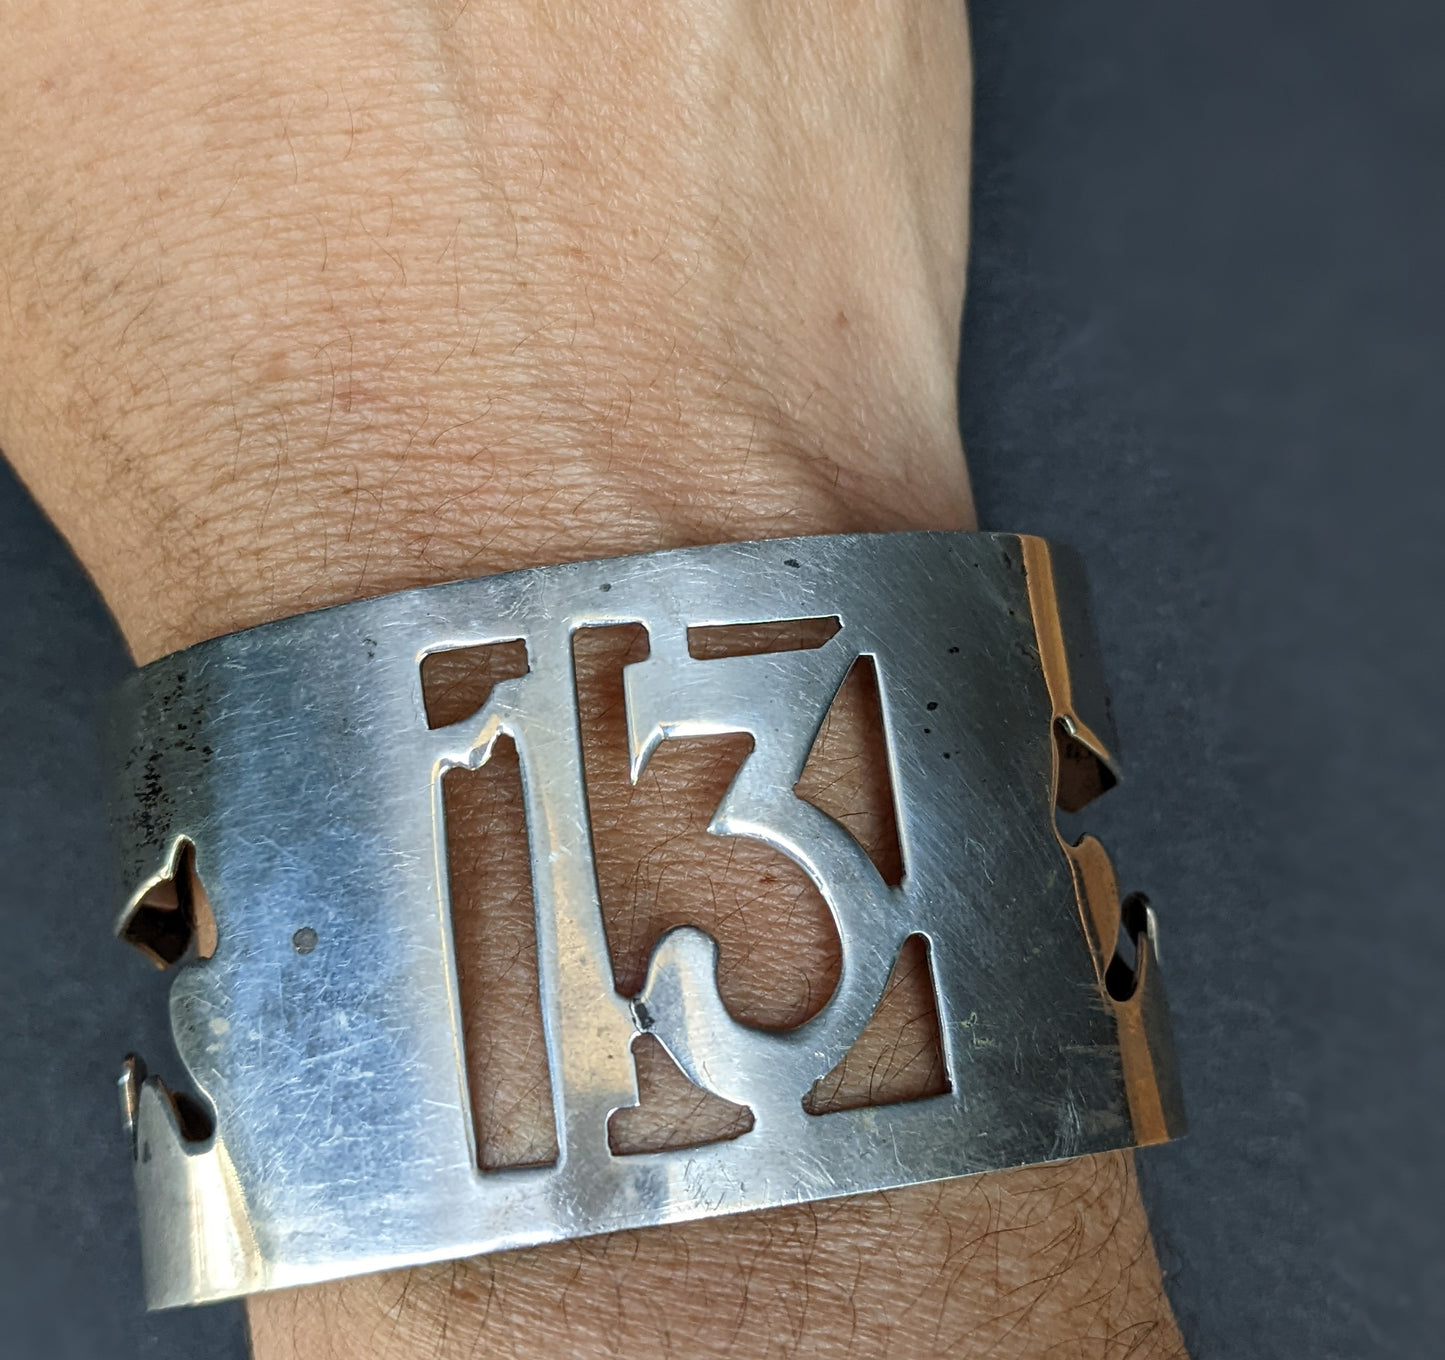 1930's French sterling lucky number 13 bracelet